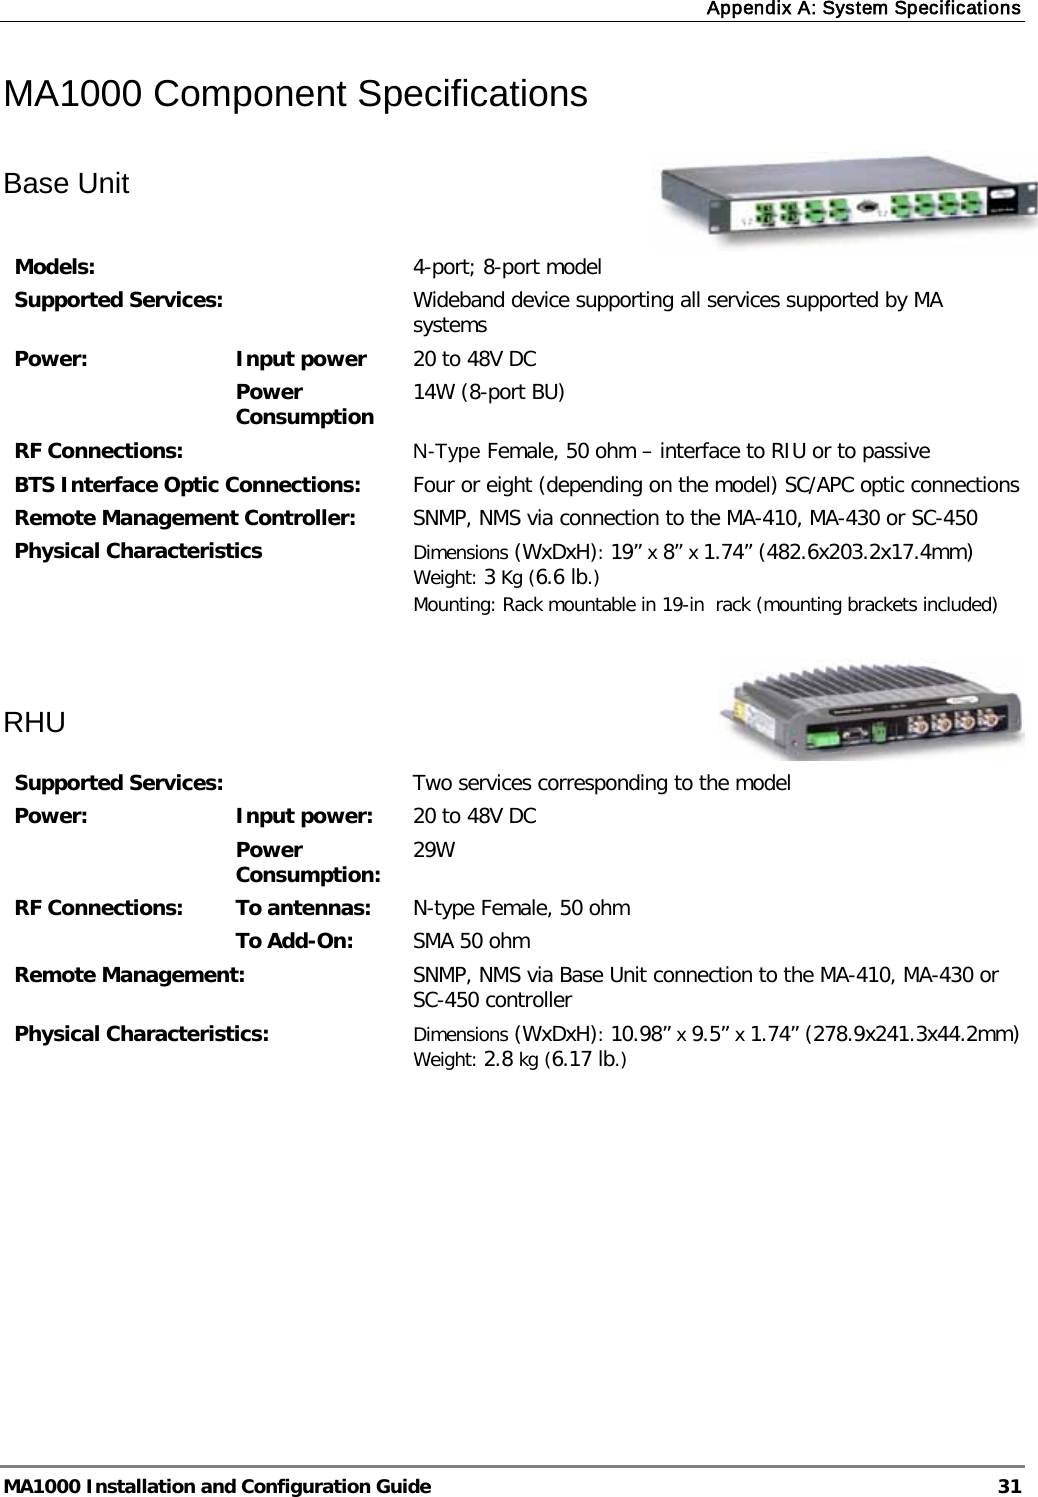 Appendix A: System Specifications  MA1000 Installation and Configuration Guide  31 MA1000 Component Specifications  Base Unit    Models:  4-port; 8-port model Supported Services:  Wideband device supporting all services supported by MA systems Power:  Input power 20 to 48V DC Power Consumption 14W (8-port BU) RF Connections: N-Type Female, 50 ohm – interface to RIU or to passive BTS Interface Optic Connections:  Four or eight (depending on the model) SC/APC optic connections Remote Management Controller: SNMP, NMS via connection to the MA-410, MA-430 or SC-450 Physical Characteristics Dimensions (WxDxH): 19” x 8” x 1.74” (482.6x203.2x17.4mm) Weight: 3 Kg (6.6 lb.) Mounting: Rack mountable in 19-in  rack (mounting brackets included)    RHU   Supported Services:  Two services corresponding to the model Power:  Input power:  20 to 48V DC Power Consumption:  29W RF Connections: To antennas:  N-type Female, 50 ohm To Add-On:  SMA 50 ohm Remote Management:  SNMP, NMS via Base Unit connection to the MA-410, MA-430 or SC-450 controller Physical Characteristics:  Dimensions (WxDxH): 10.98” x 9.5” x 1.74” (278.9x241.3x44.2mm) Weight: 2.8 kg (6.17 lb.)     